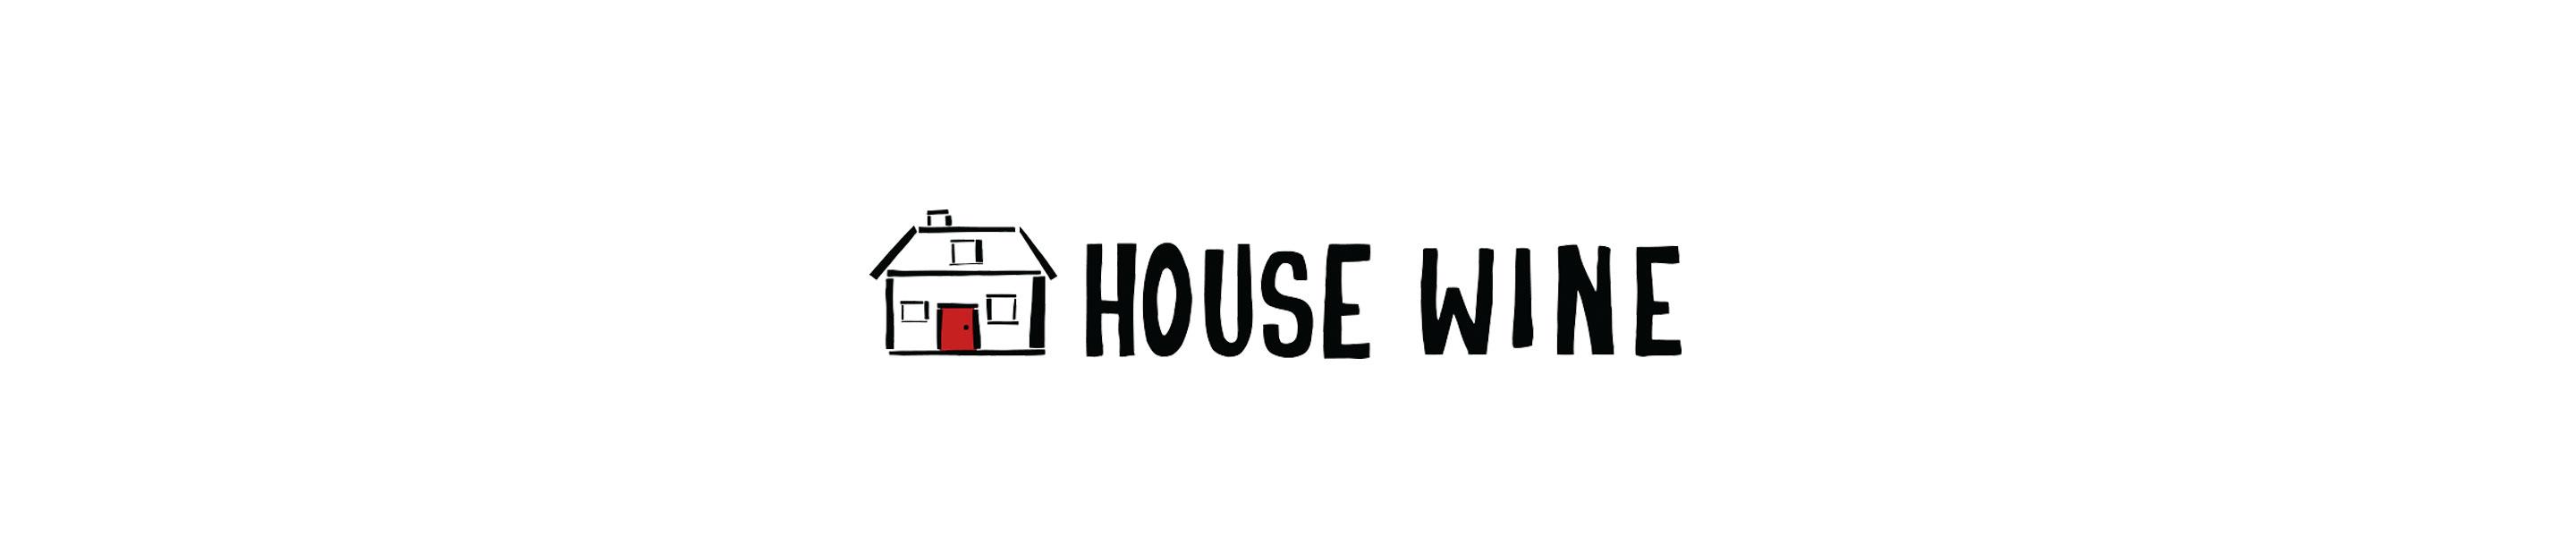 HOUSE WINE was created with the goal of bringing magnificent wine into your home at a magnificent price. The finest quality grapes are selected from high quality vineyards to produce iconic wines that deliver robust and complex flavors. The result is a daily HOUSE pour that every household can enjoy and afford.